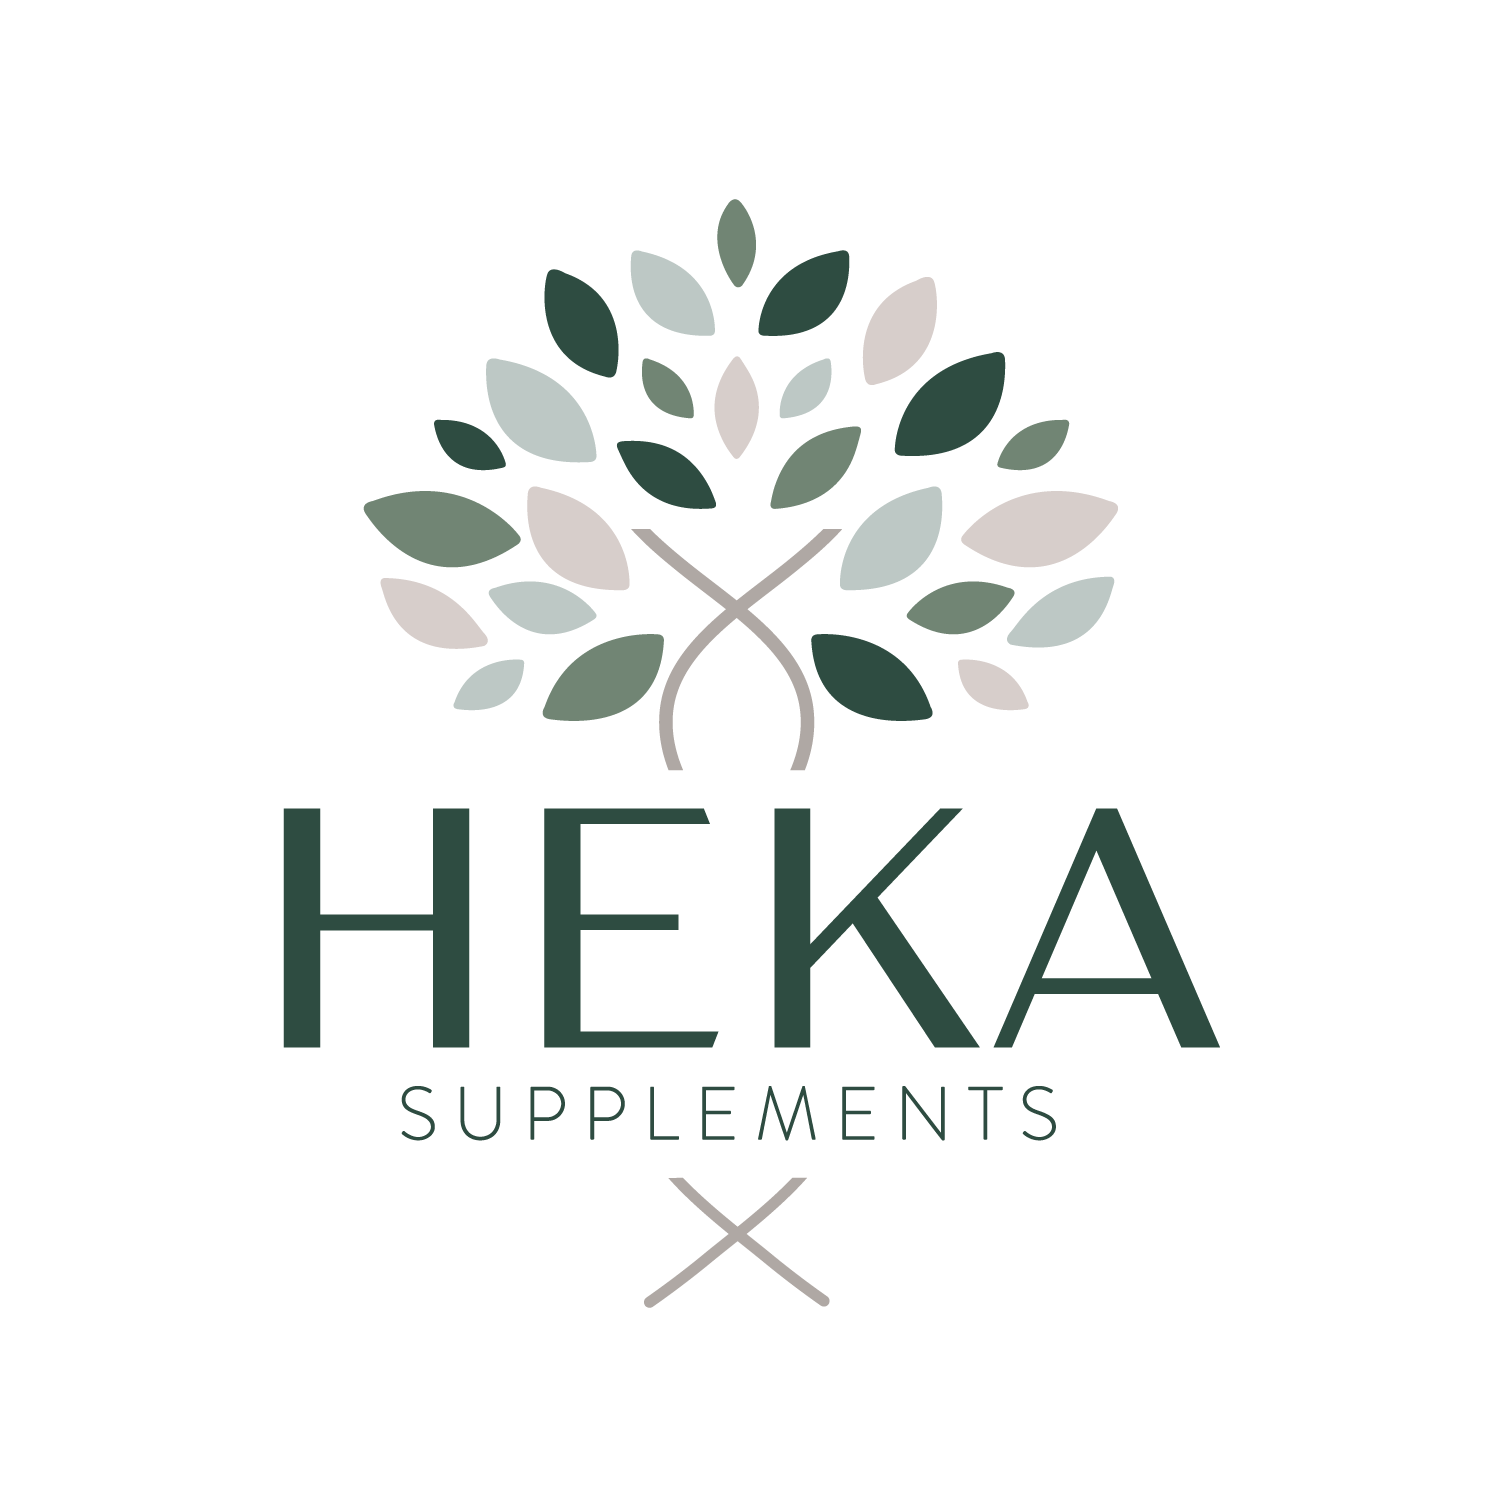 Logo design for Heka Supplements - tree with green leaves and heka symbol as the trunk